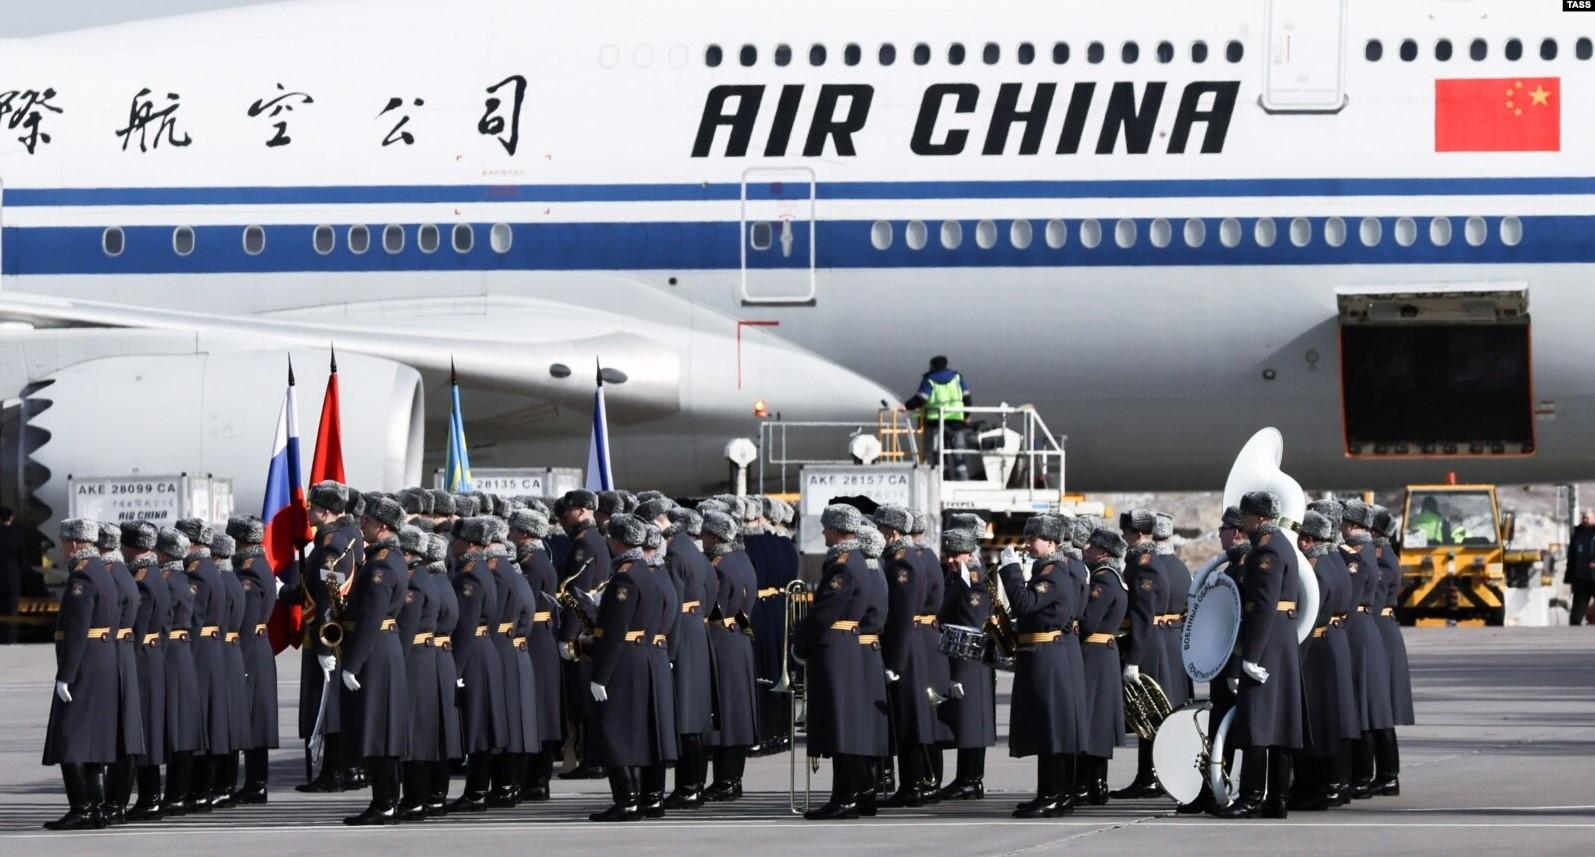 Xi Jinping arrives in Russia for negotiations with Putin